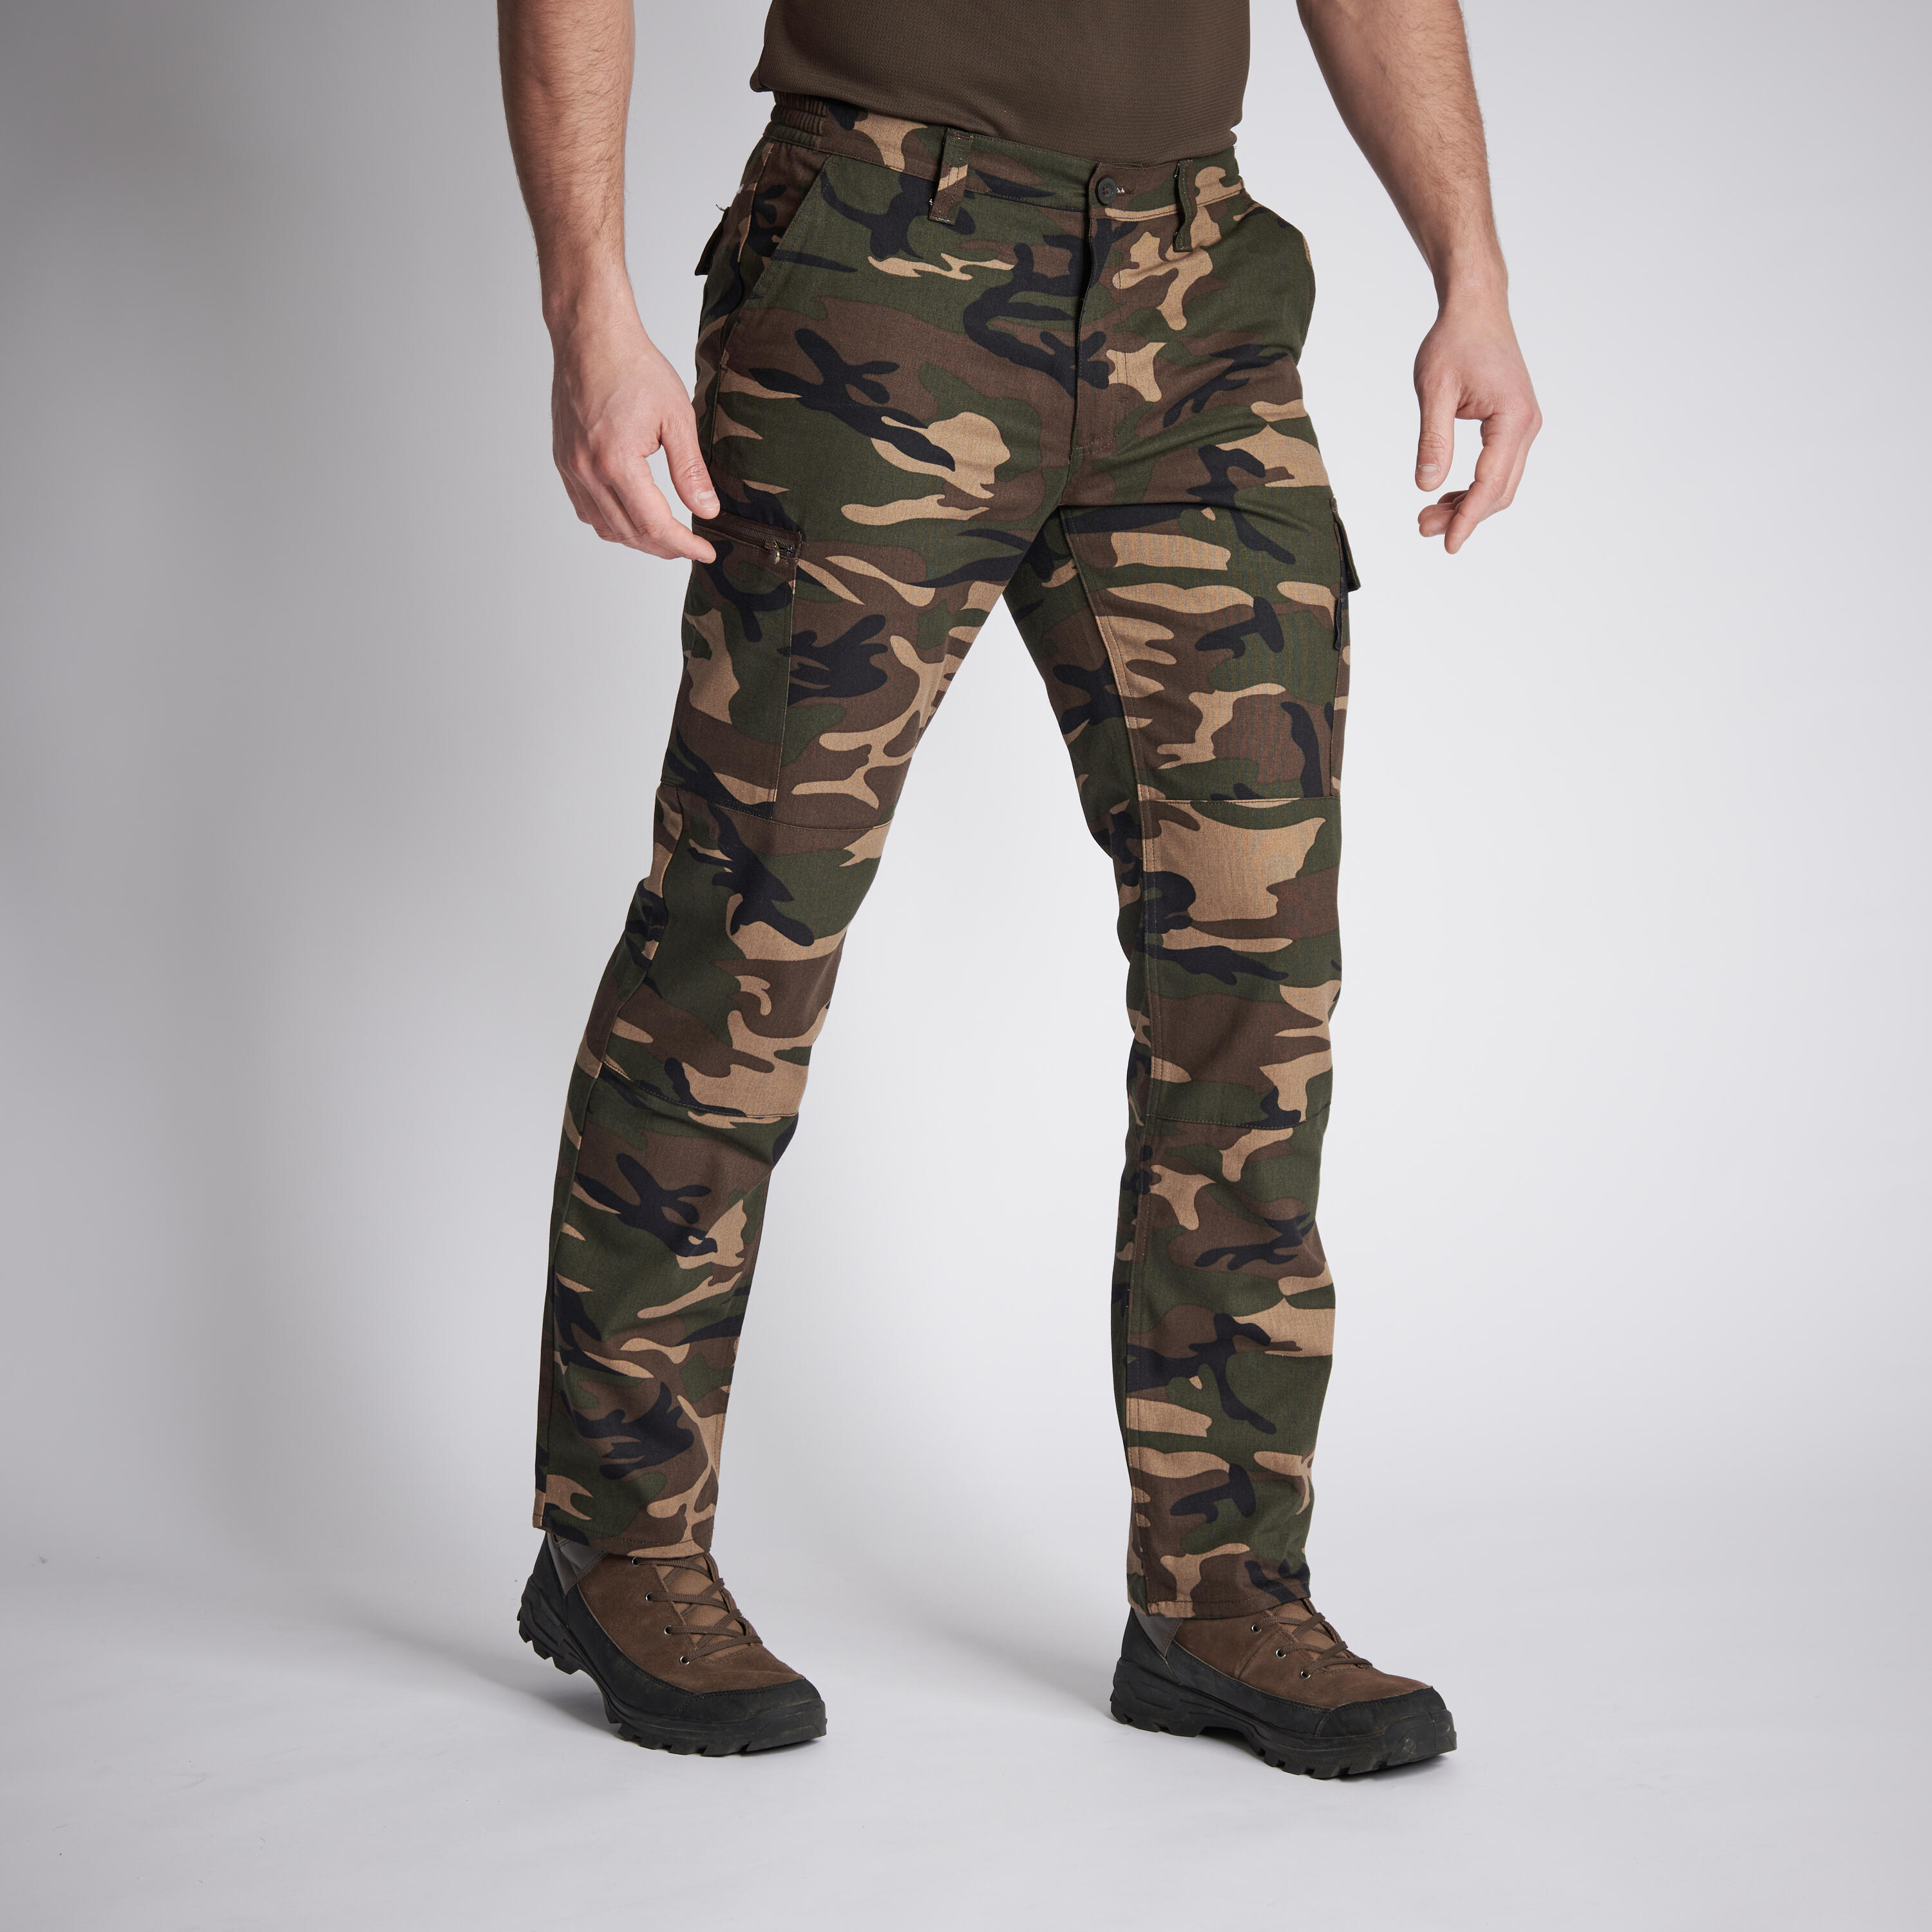 Devil Men's Premium Coton Army Relaxed Fit Zipper Slim fit Cargo 8 Pocket  Jogger Jeans Pants (Camouflage, 40) : Amazon.in: Clothing & Accessories